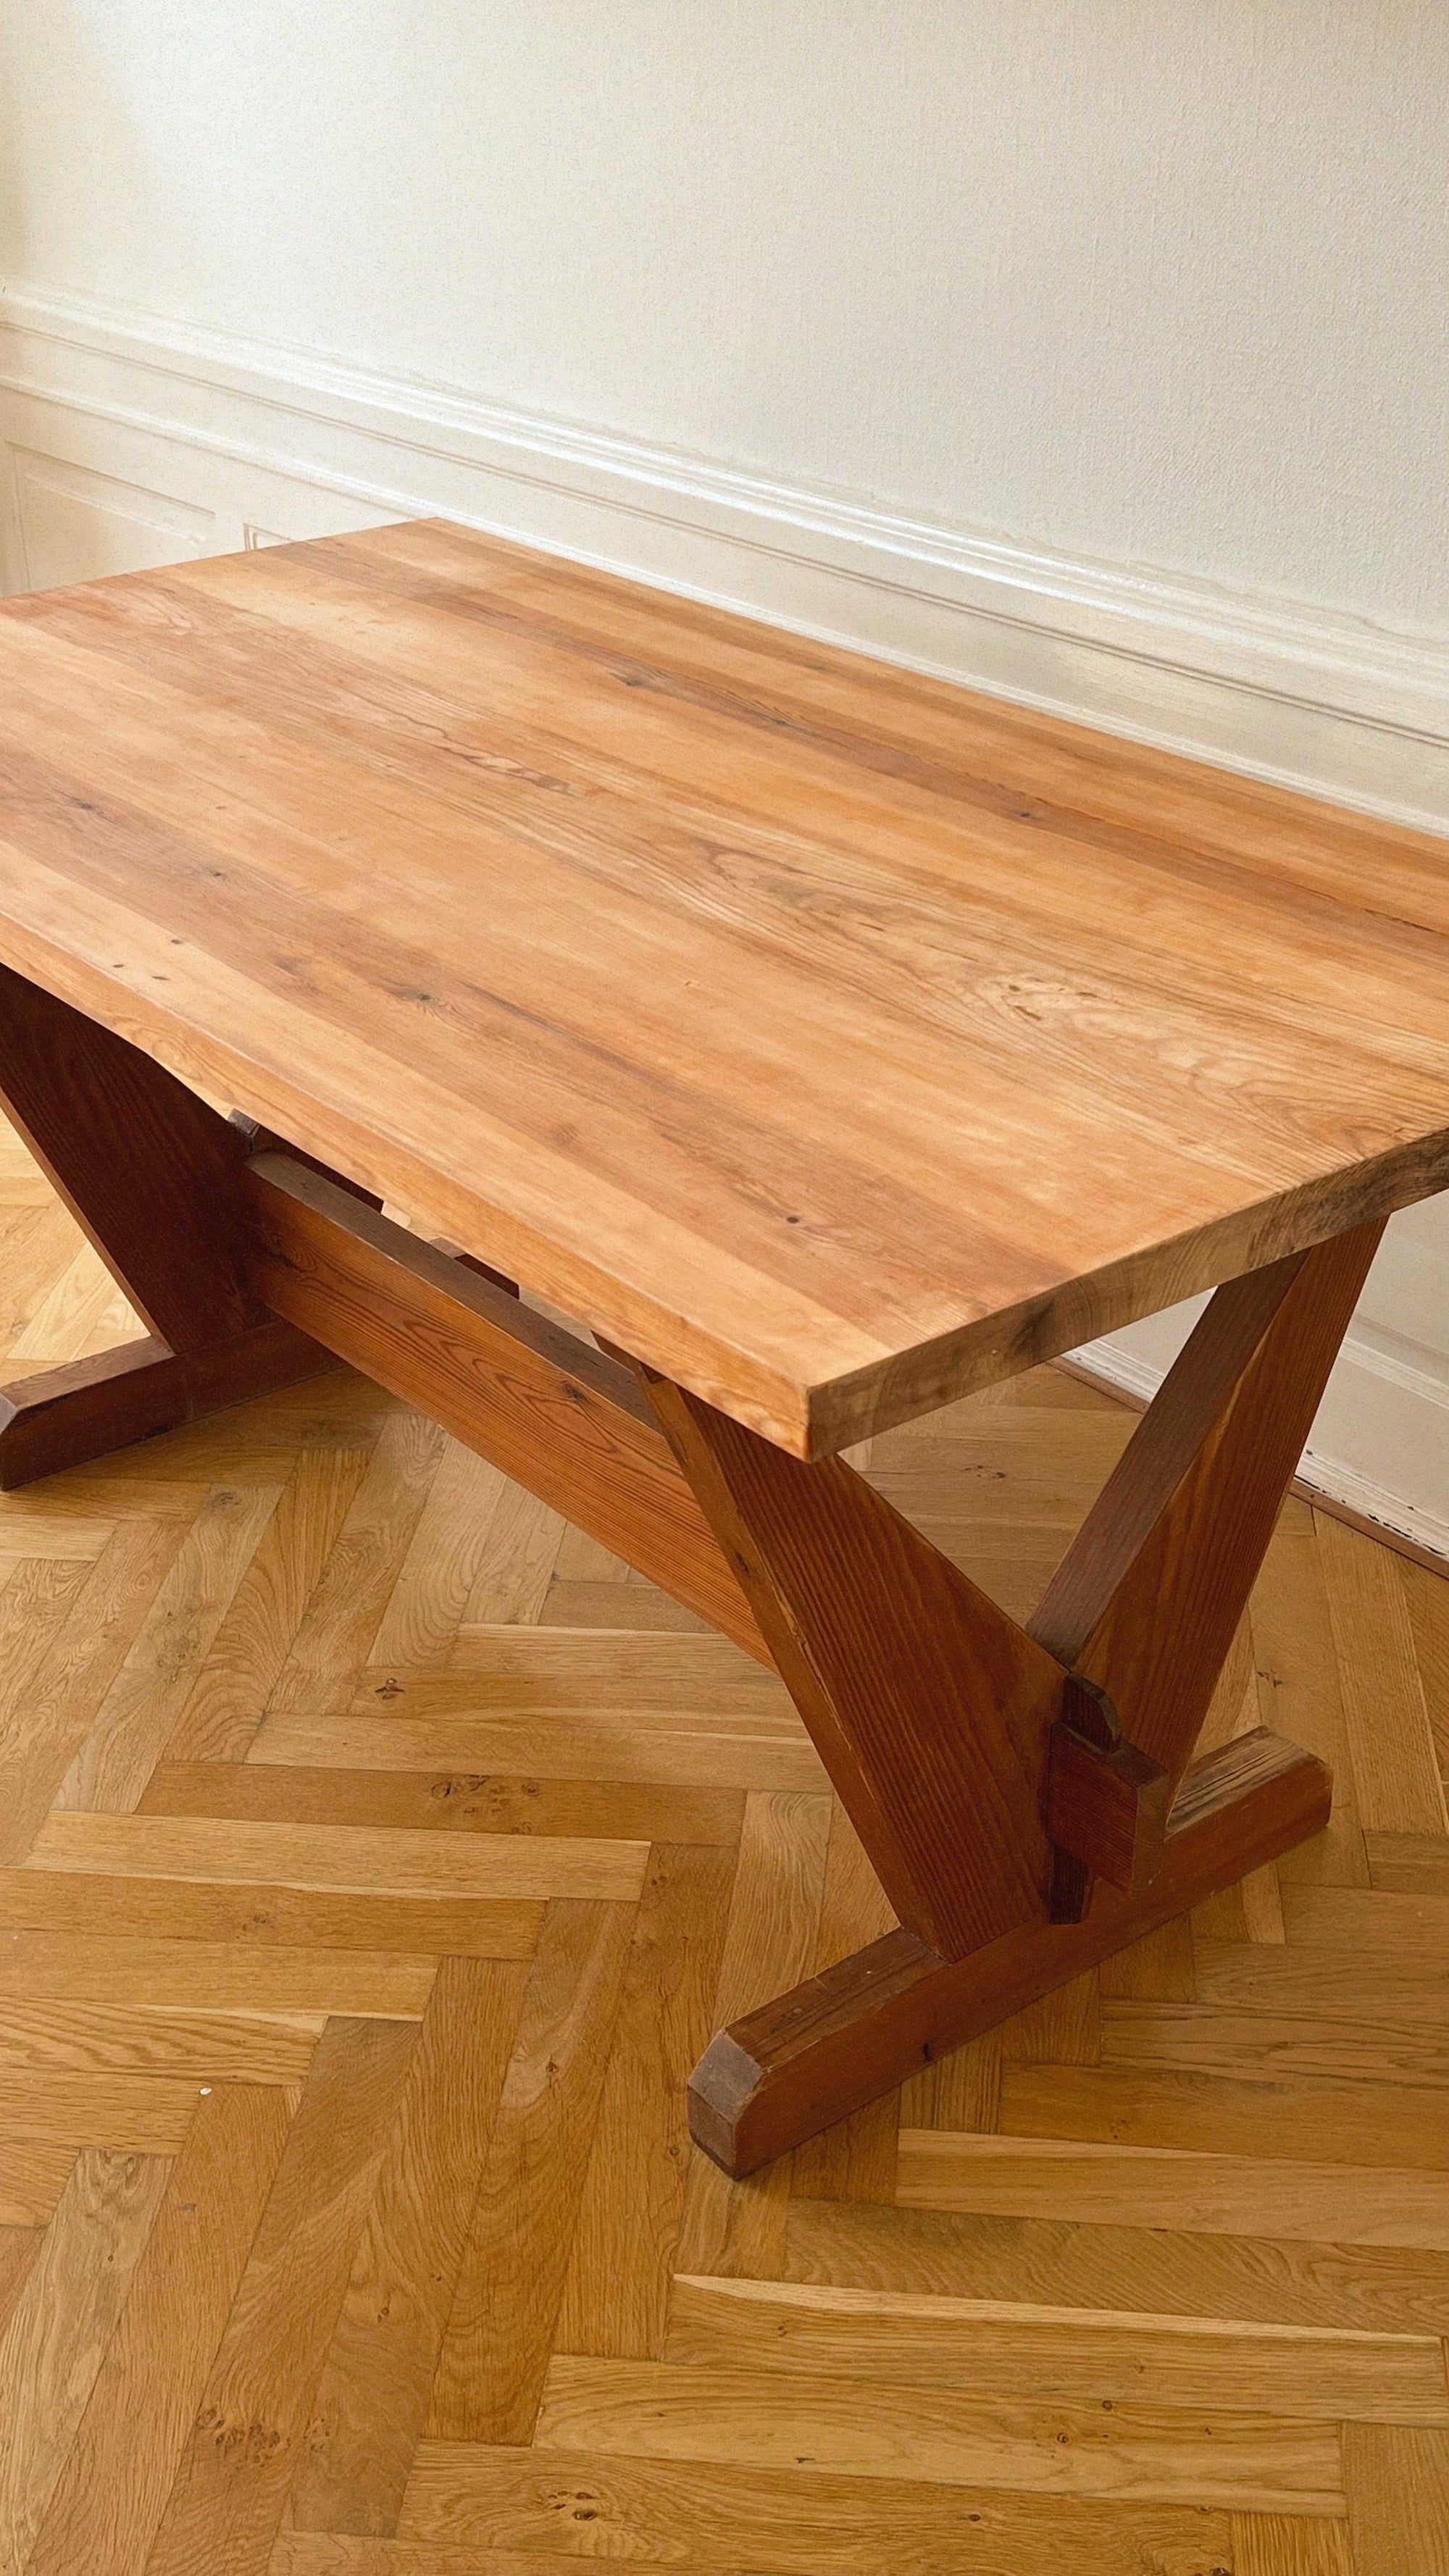 Solid pine wood table